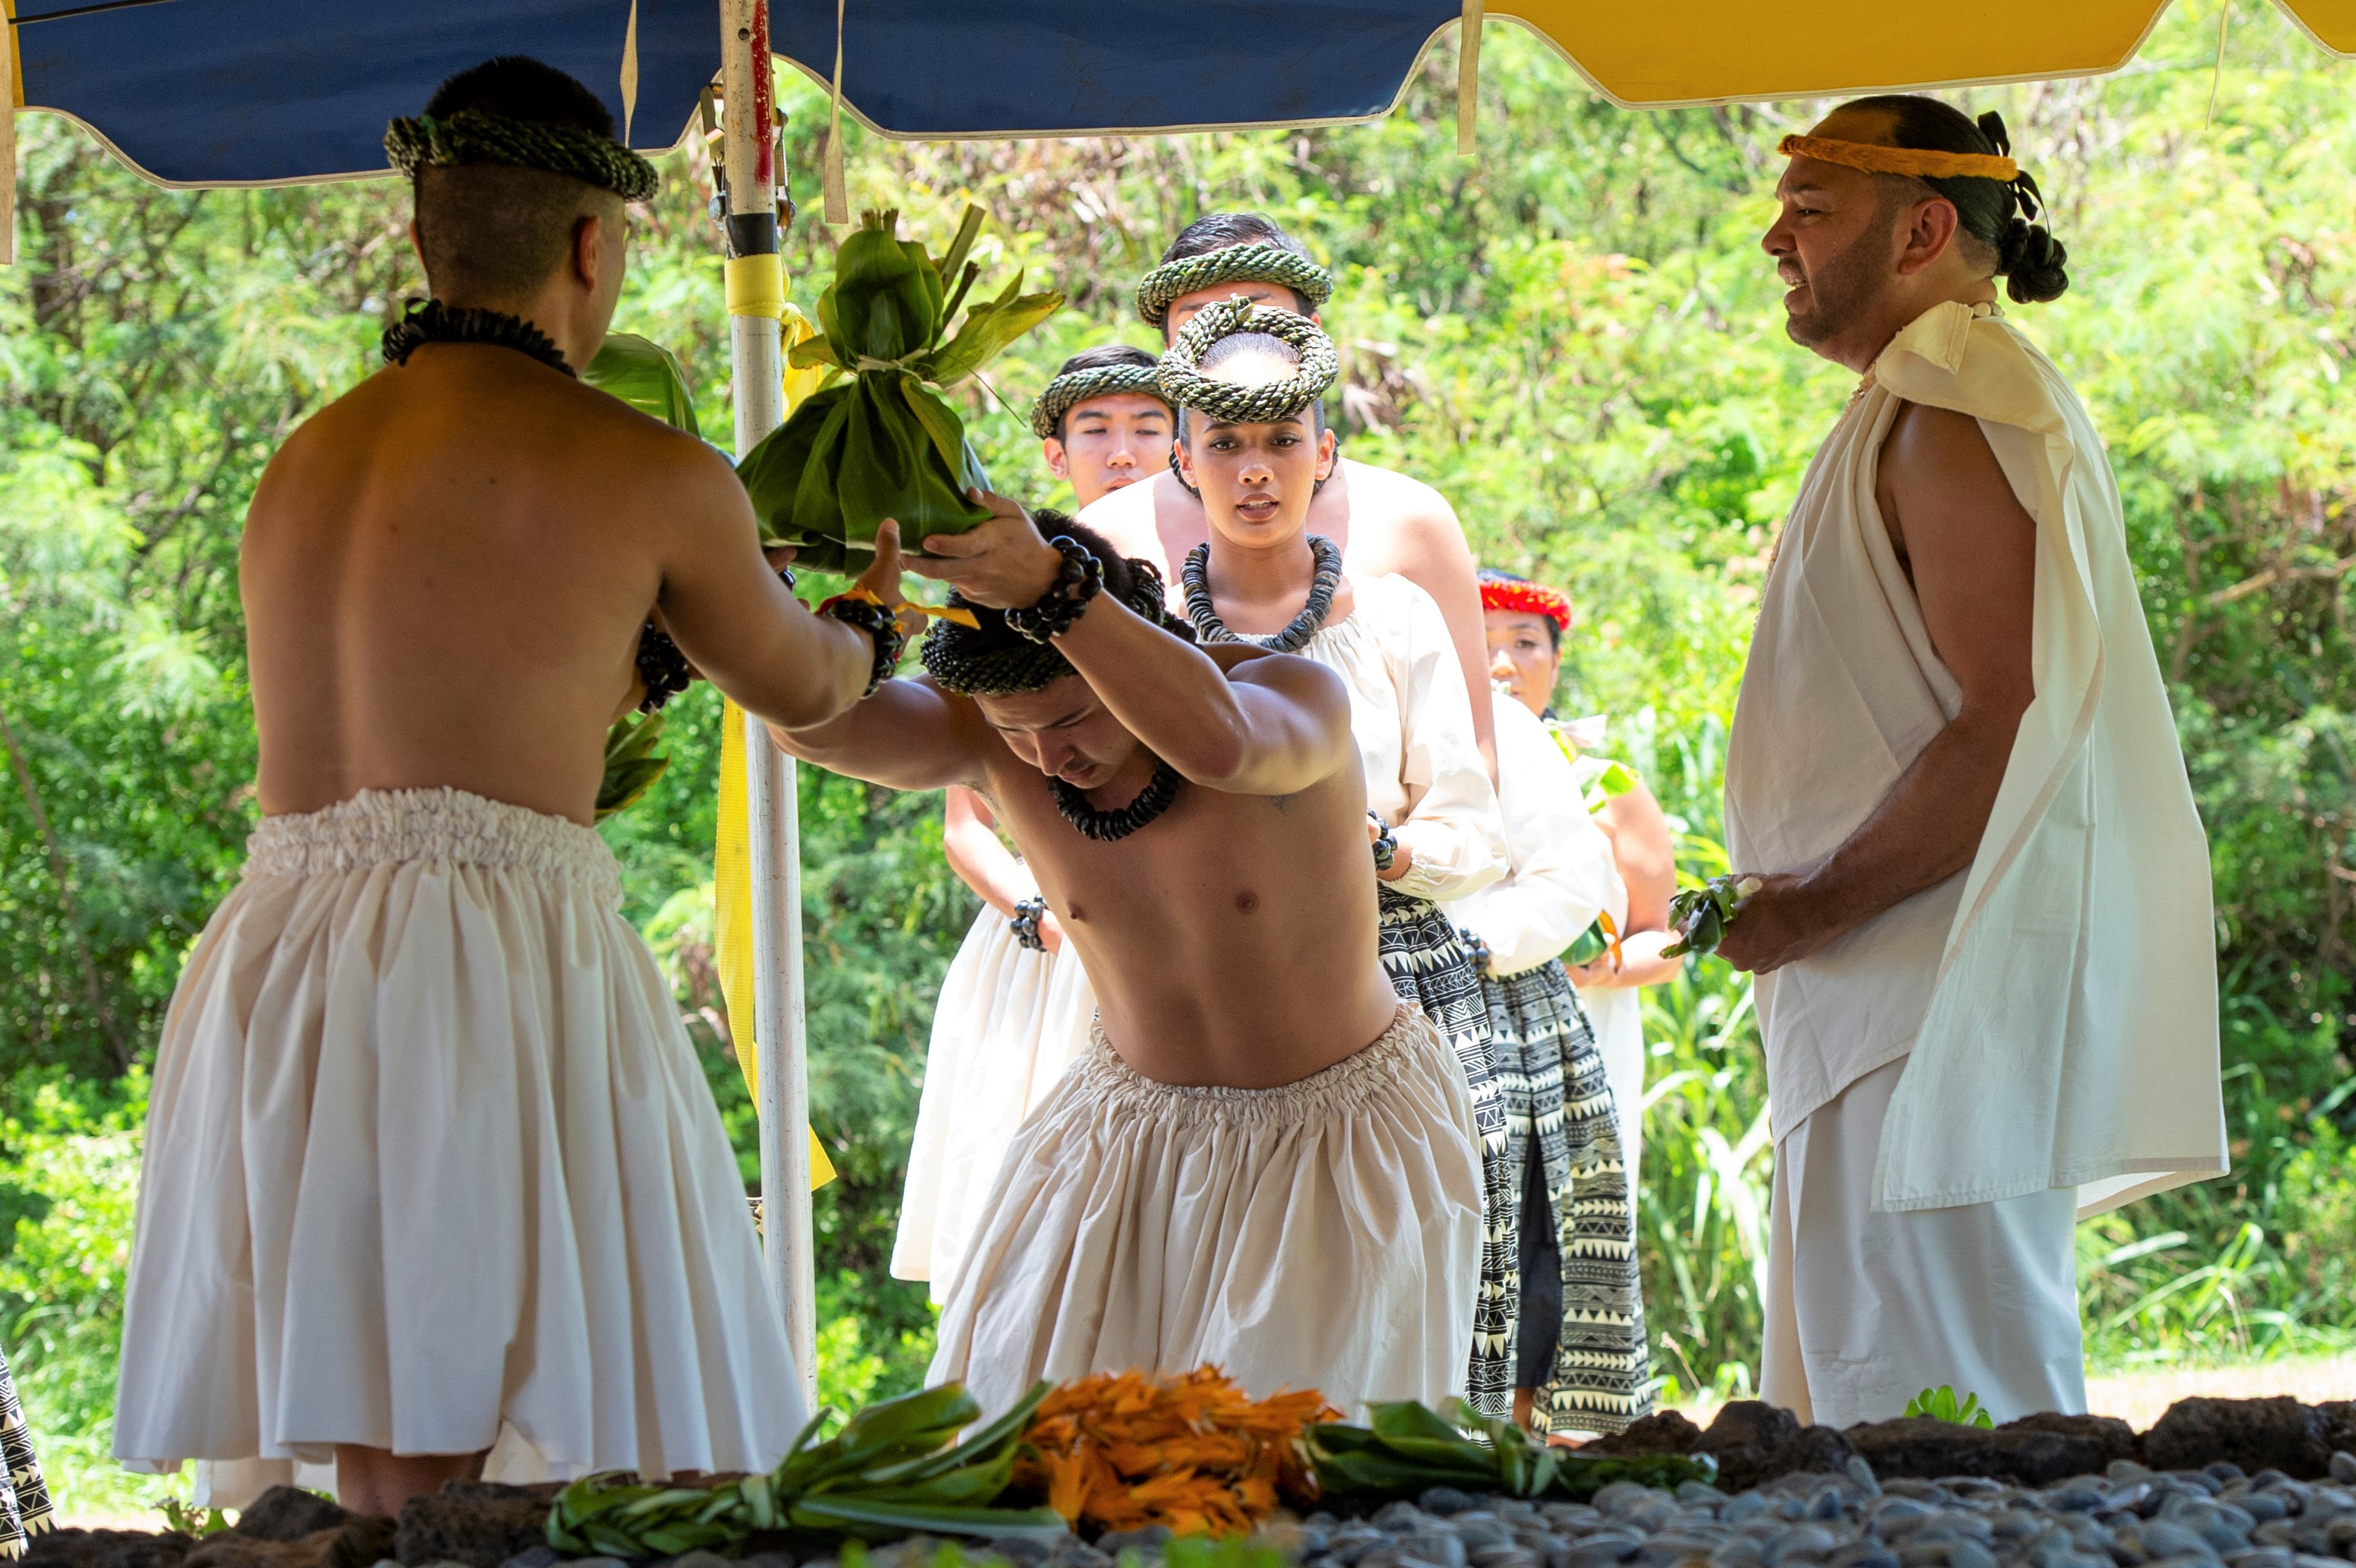 PMRF, Lineal Descendants Honor Ancestral Native Hawaiians at Annual Summer Solstice Ceremony